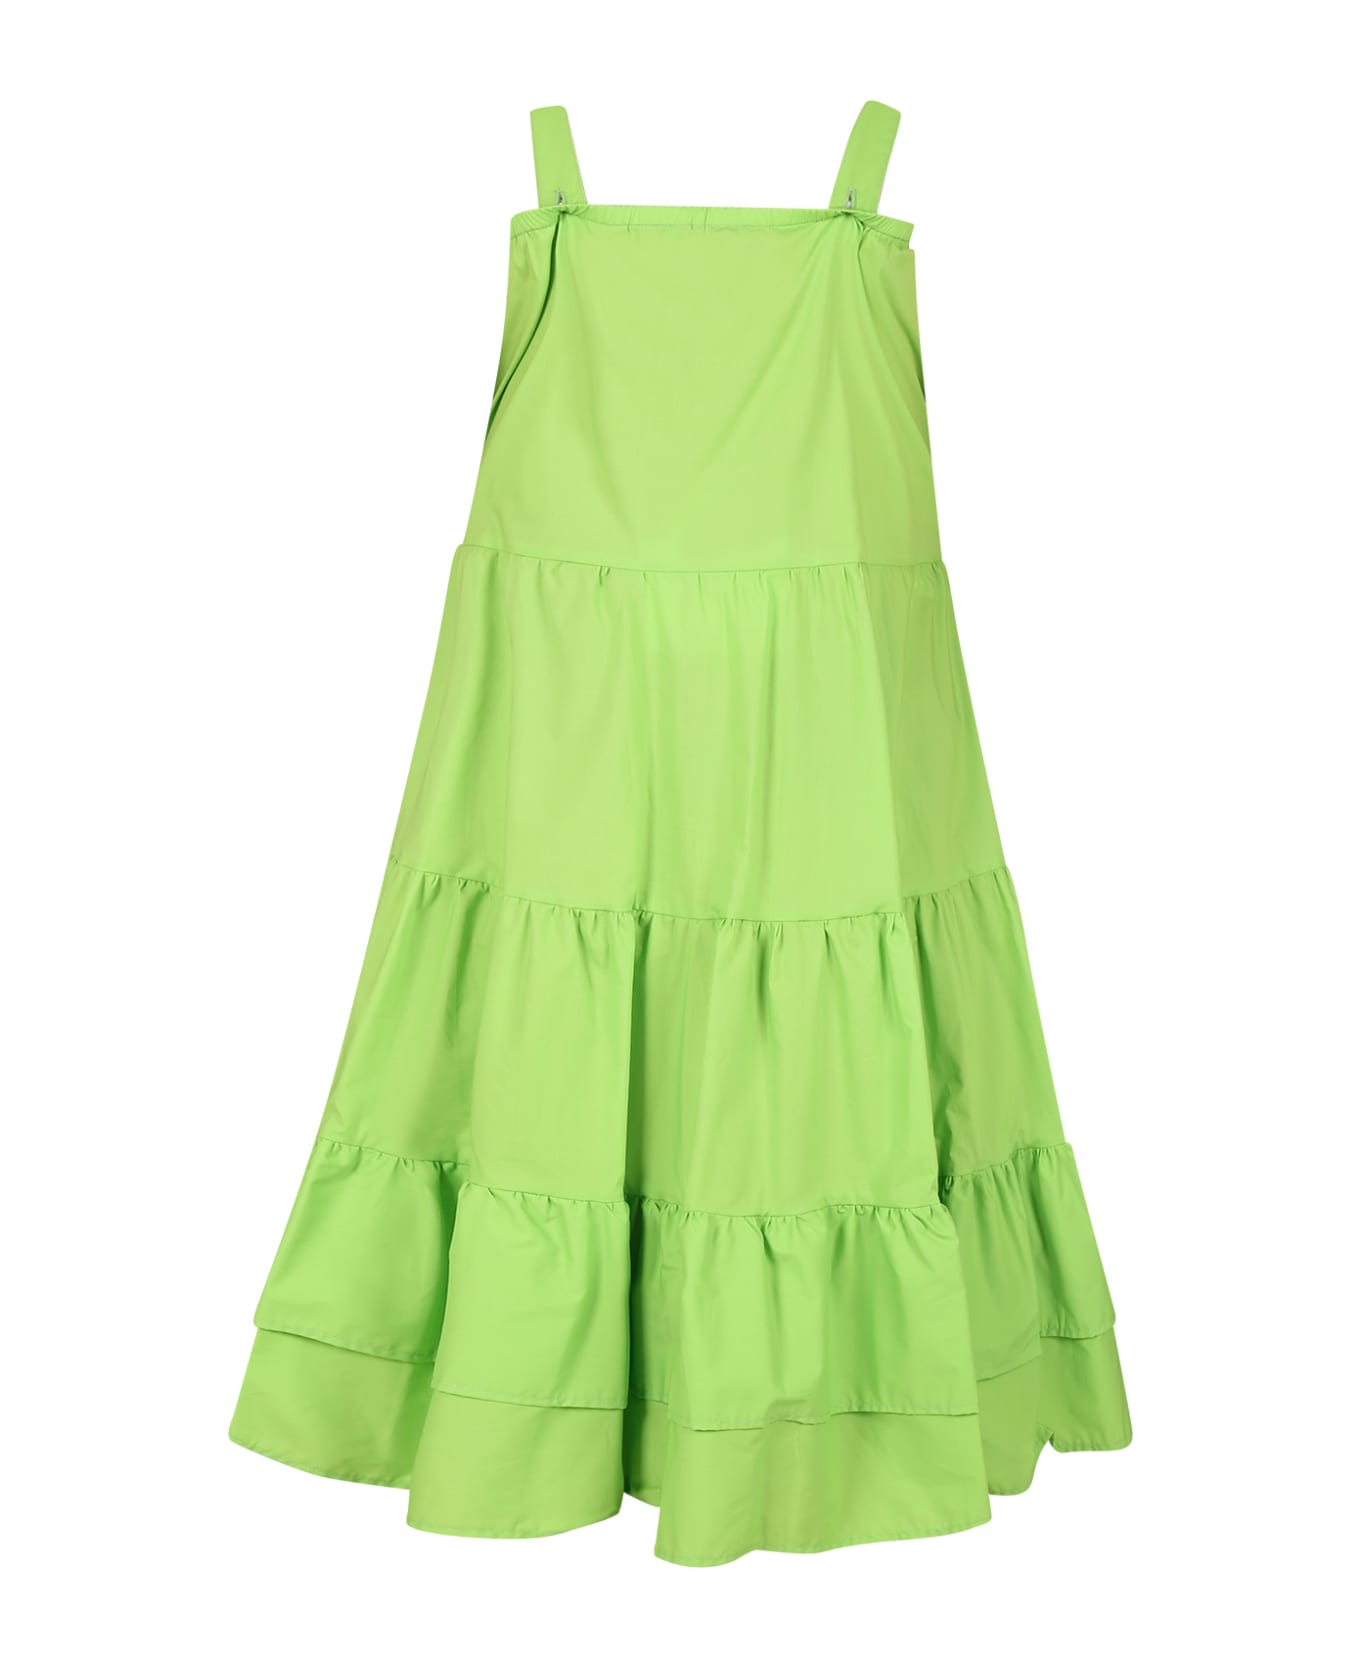 MSGM Green Dress For Girl With Logo - Green